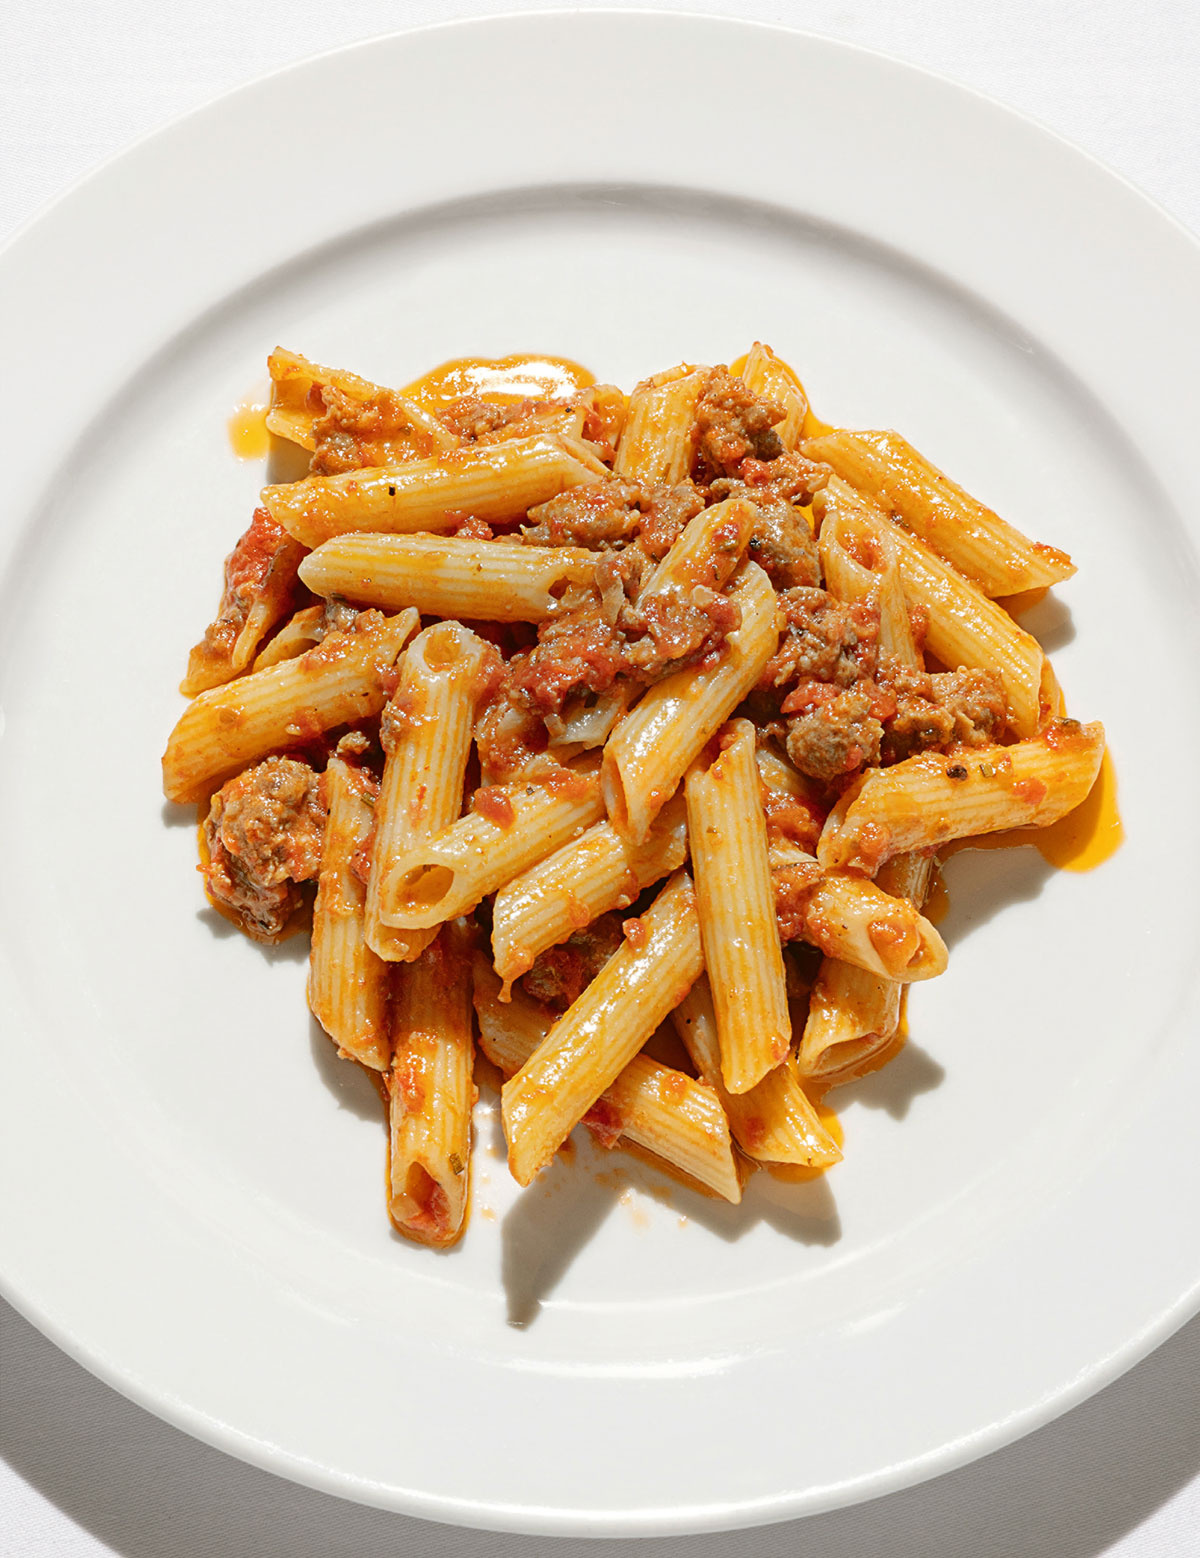 Image of River Cafe's Penne with Quick Sausage Sauce